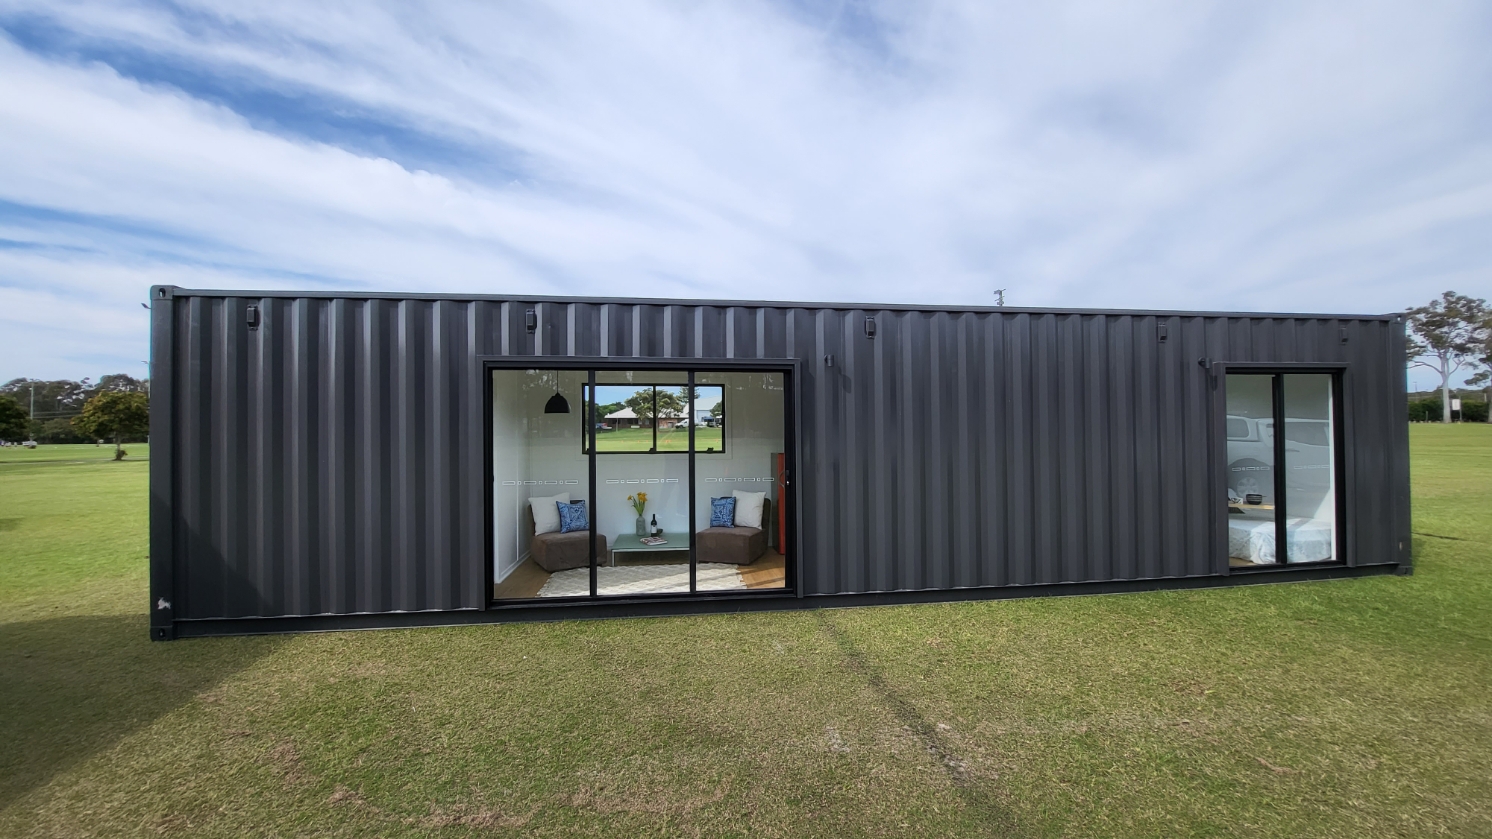 40ft container home_grannyflats4u